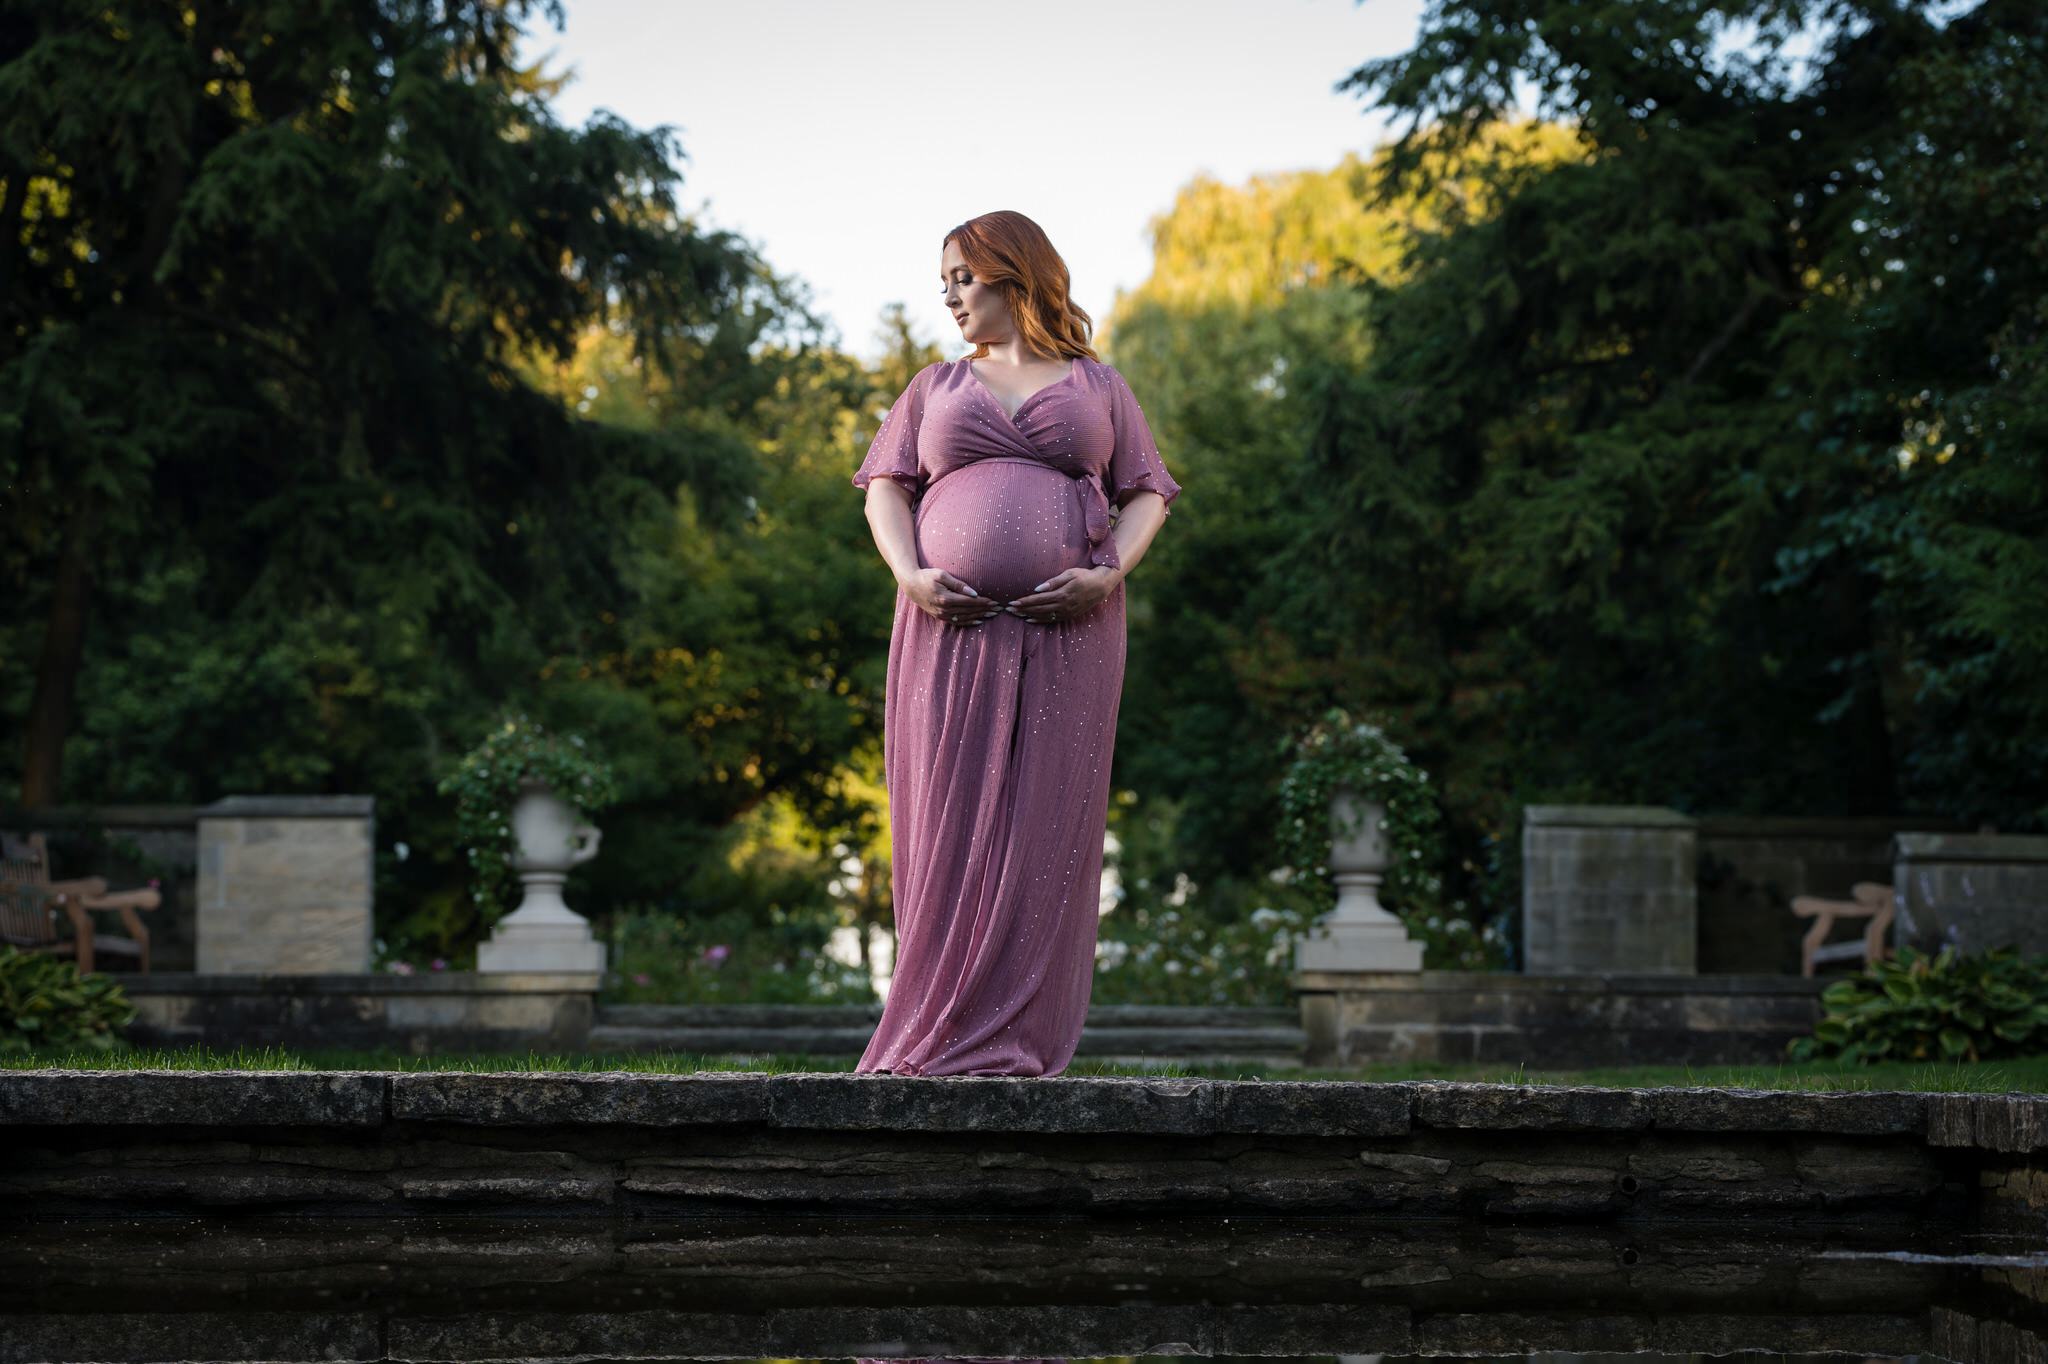 An expecting mom looks over her shoulder and holds her bump as her reflection is seen in a pond during her maternity session at Edsel Ford